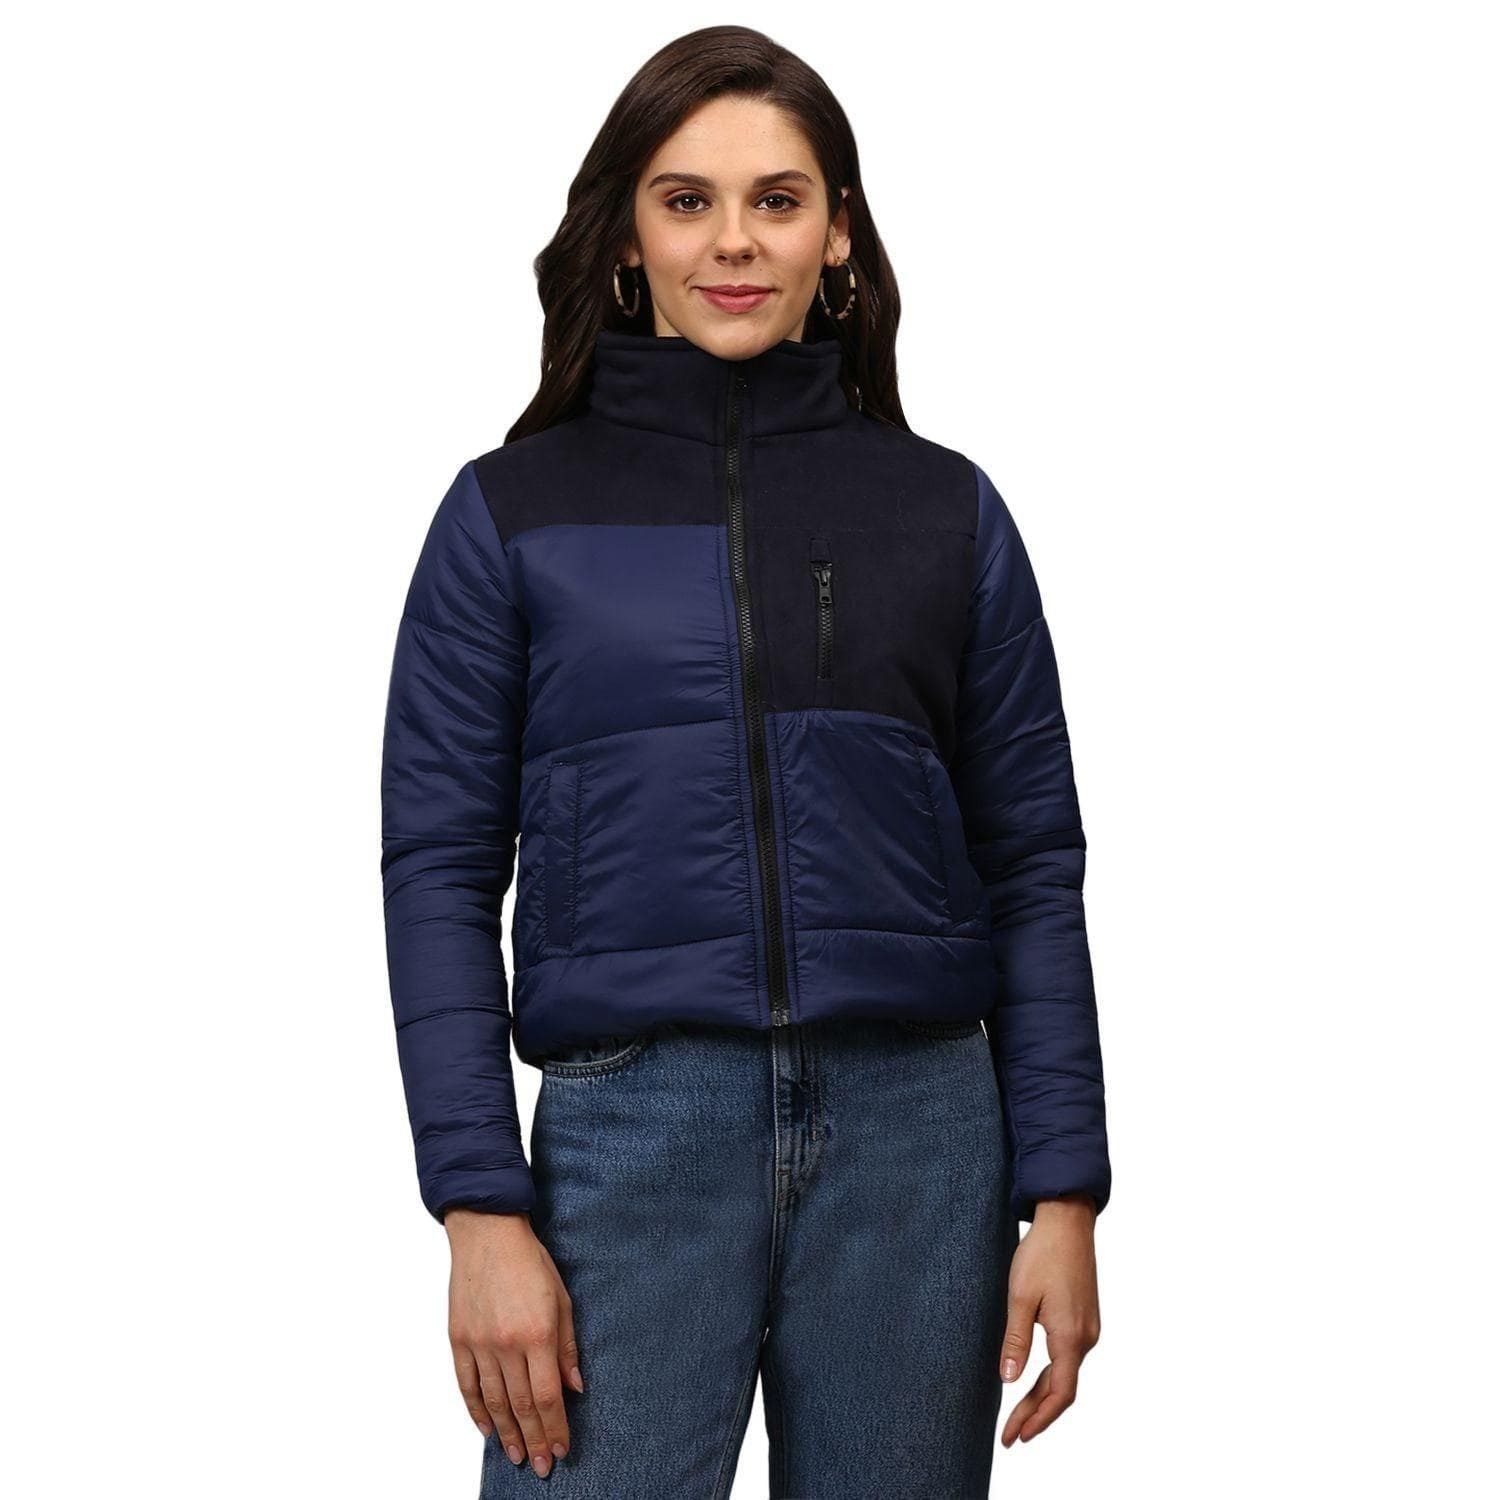 Campus Sutra Women Colorblock Stylish Casual Bomber Jacket - Fizzibyizzi